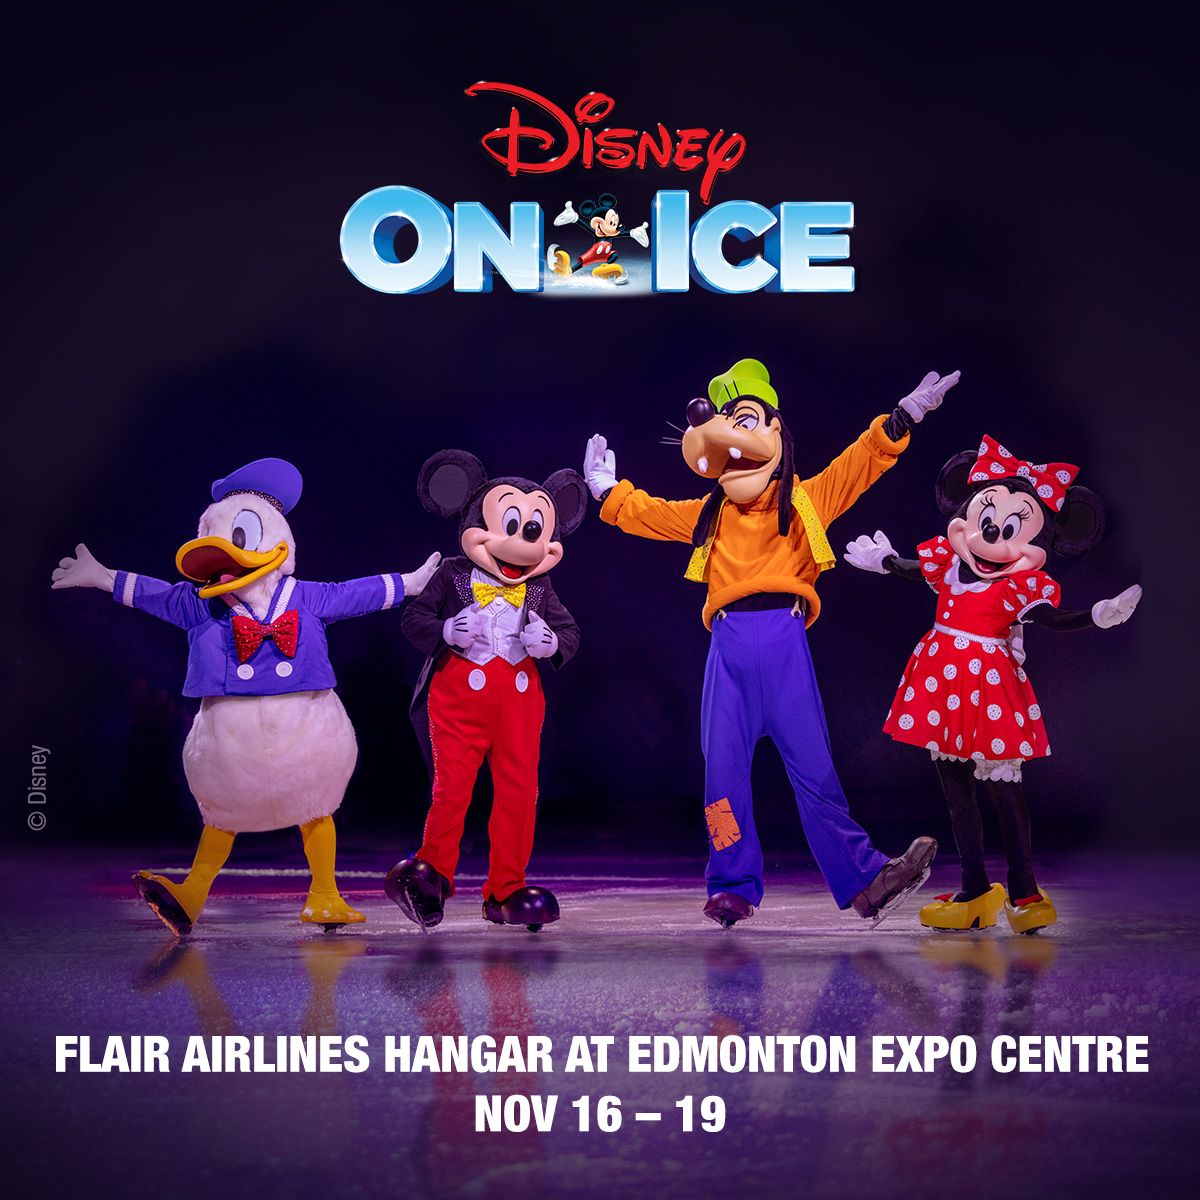 ❄️ Experience Disney On Ice presents Into the Magic! ❄️ ✨ See beloved Disney’s characters like Moana, Frozen, Coco and Beauty and the Beast and more skate through The Flair Airlines Hangar from November 16-19 💫. 🎫 Secure your seats 👉🏽bit.ly/3sIrYY7